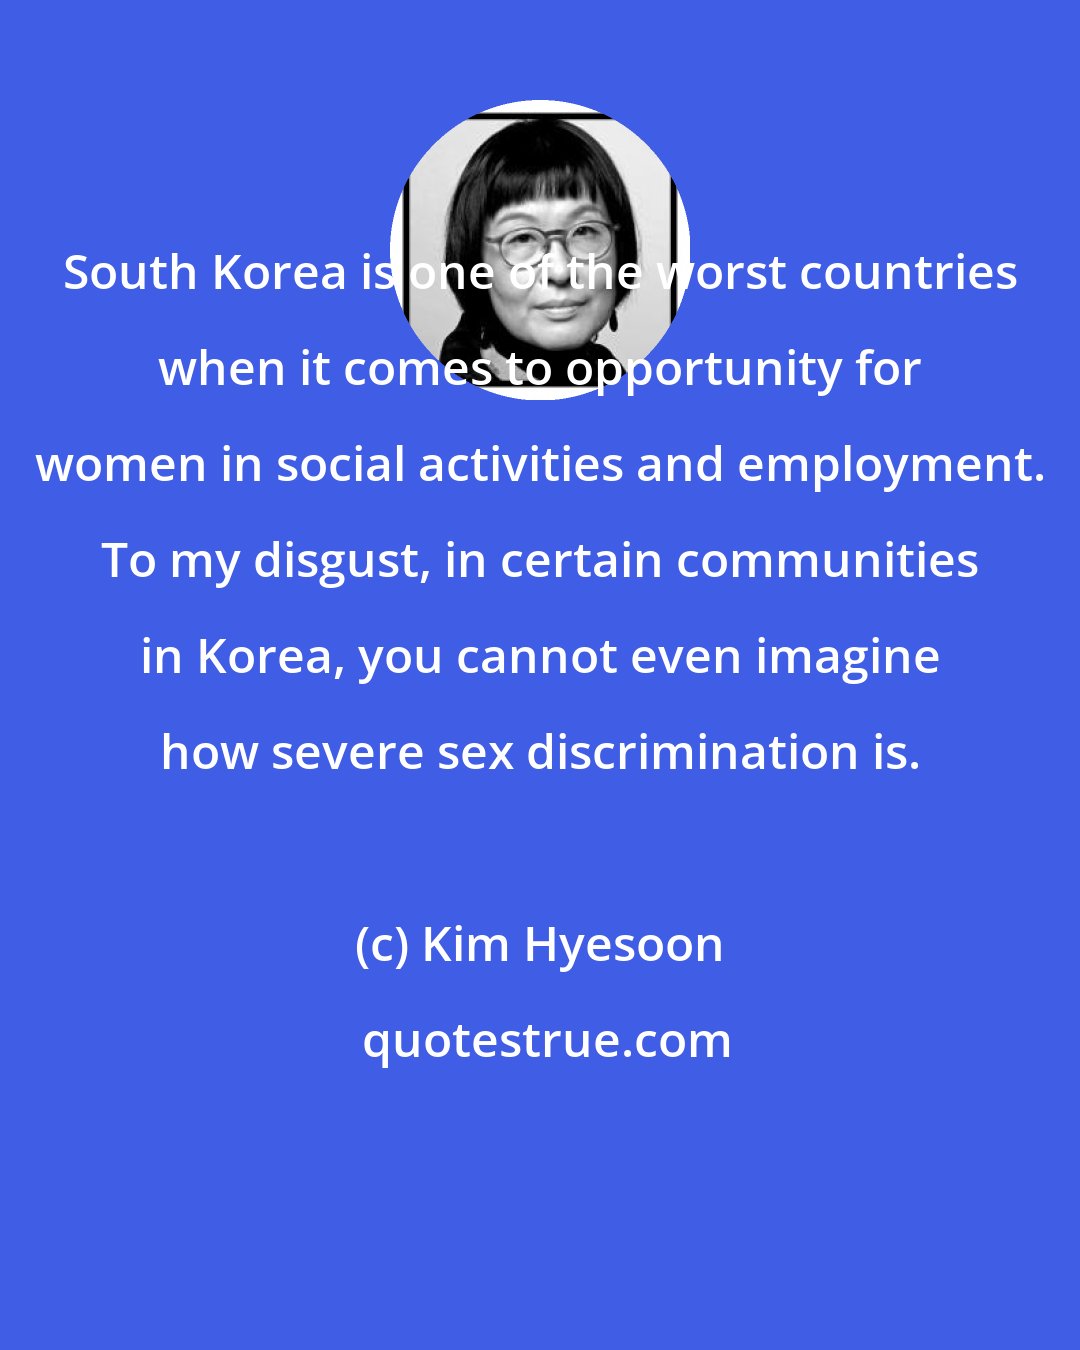 Kim Hyesoon: South Korea is one of the worst countries when it comes to opportunity for women in social activities and employment. To my disgust, in certain communities in Korea, you cannot even imagine how severe sex discrimination is.